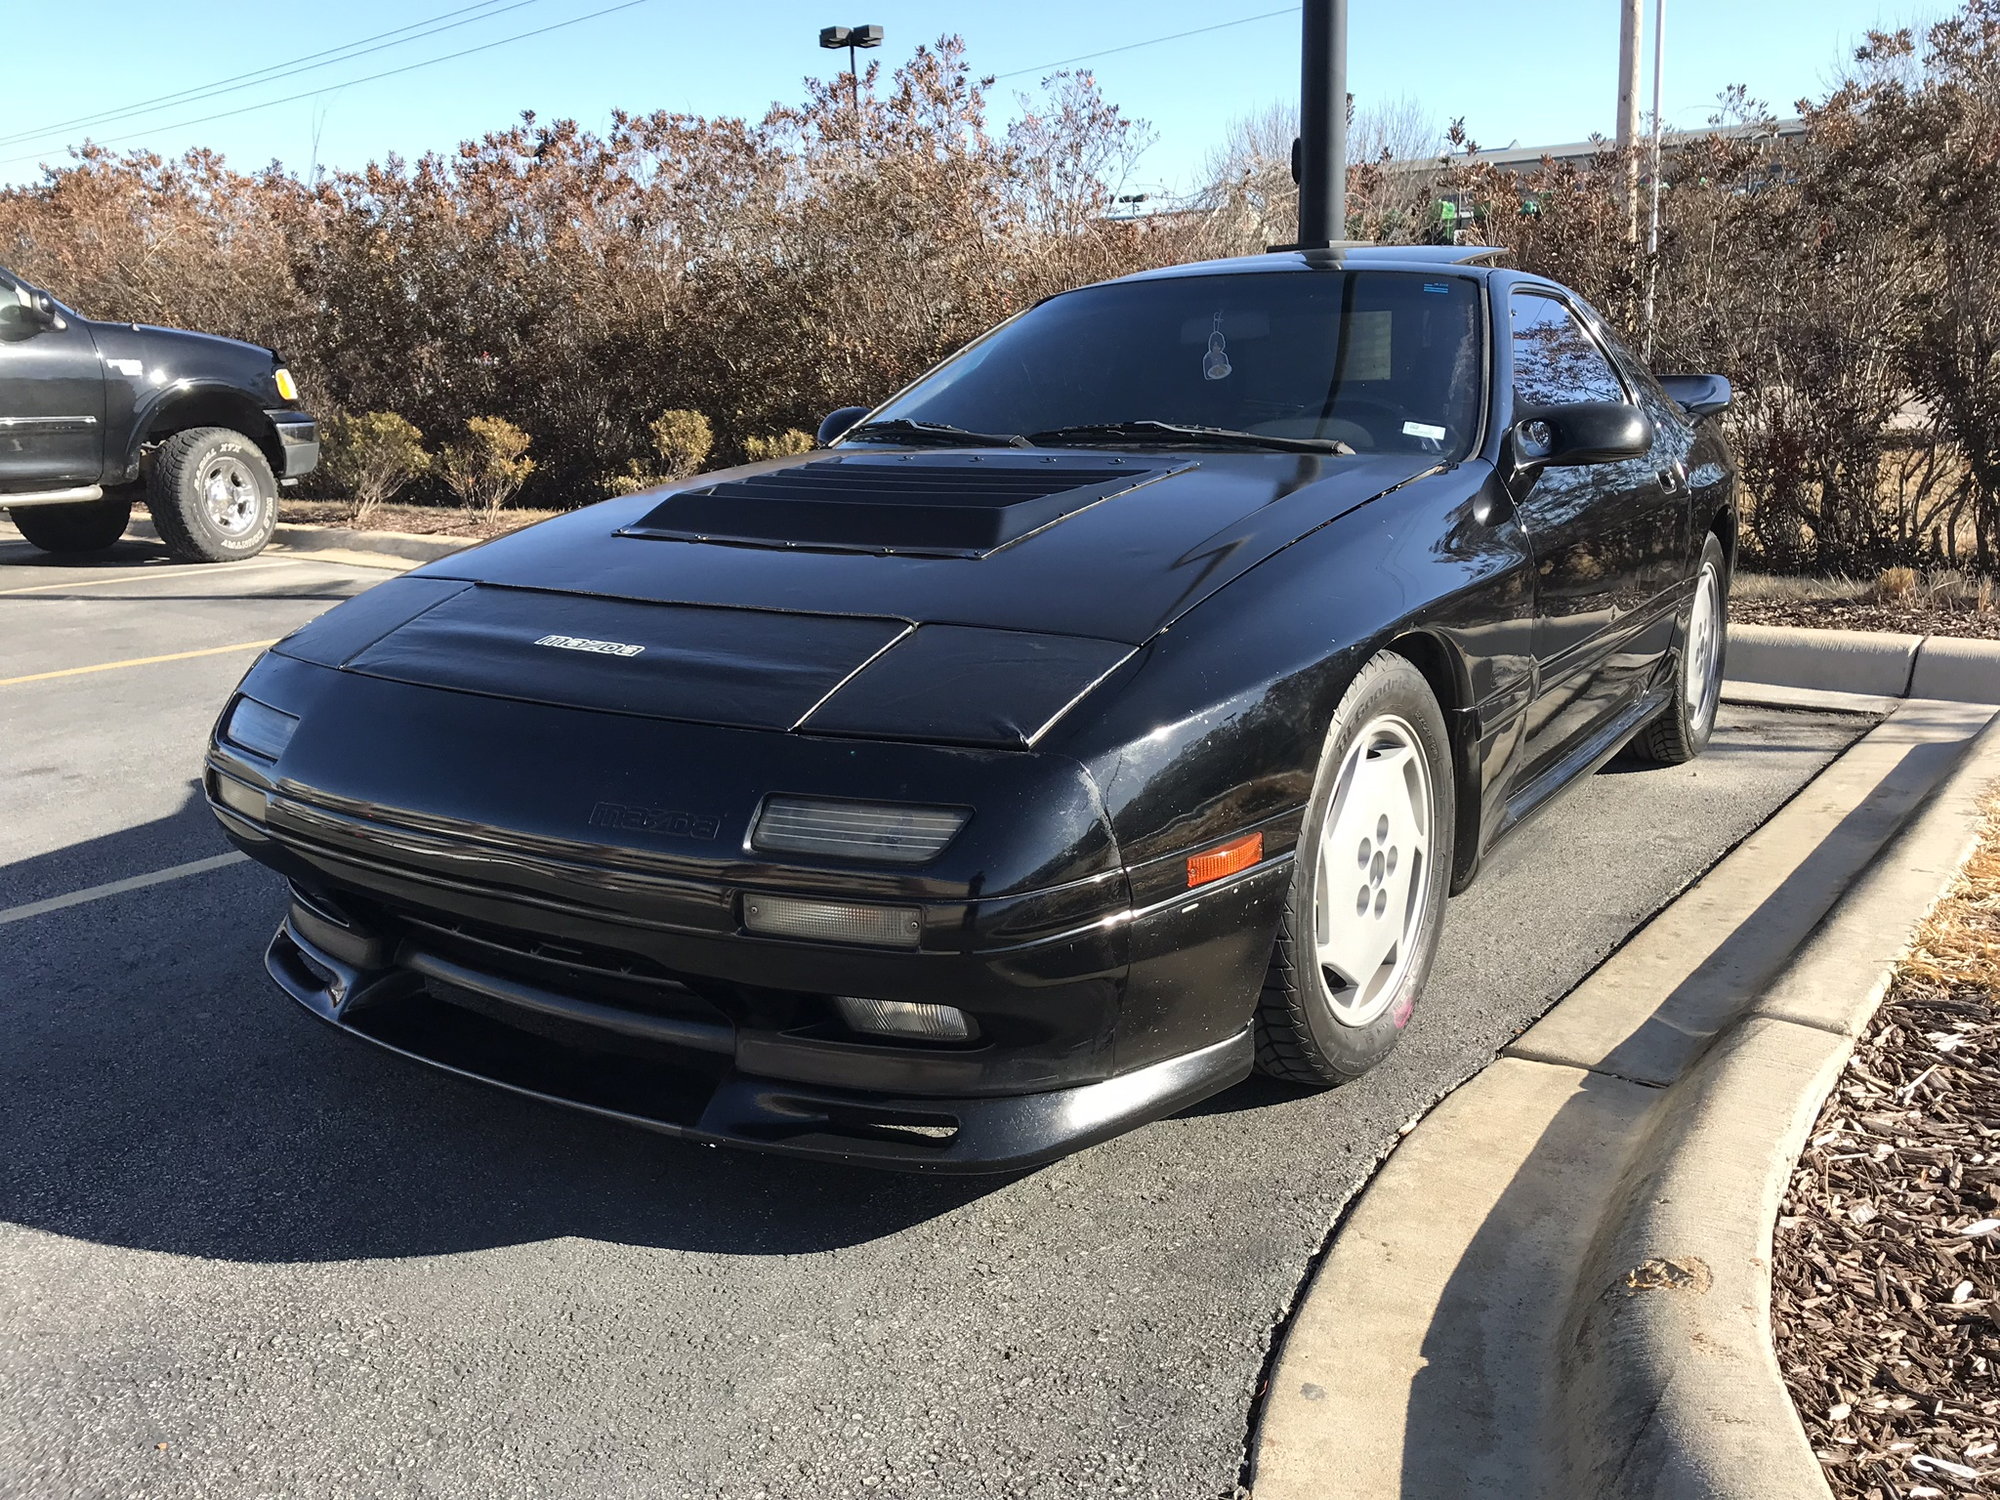 Wheels and Tires/Axles - Turbo 2 wheels s4 - Used - 1986 to 1991 Mazda RX-7 - St Louis, MO 63114, United States